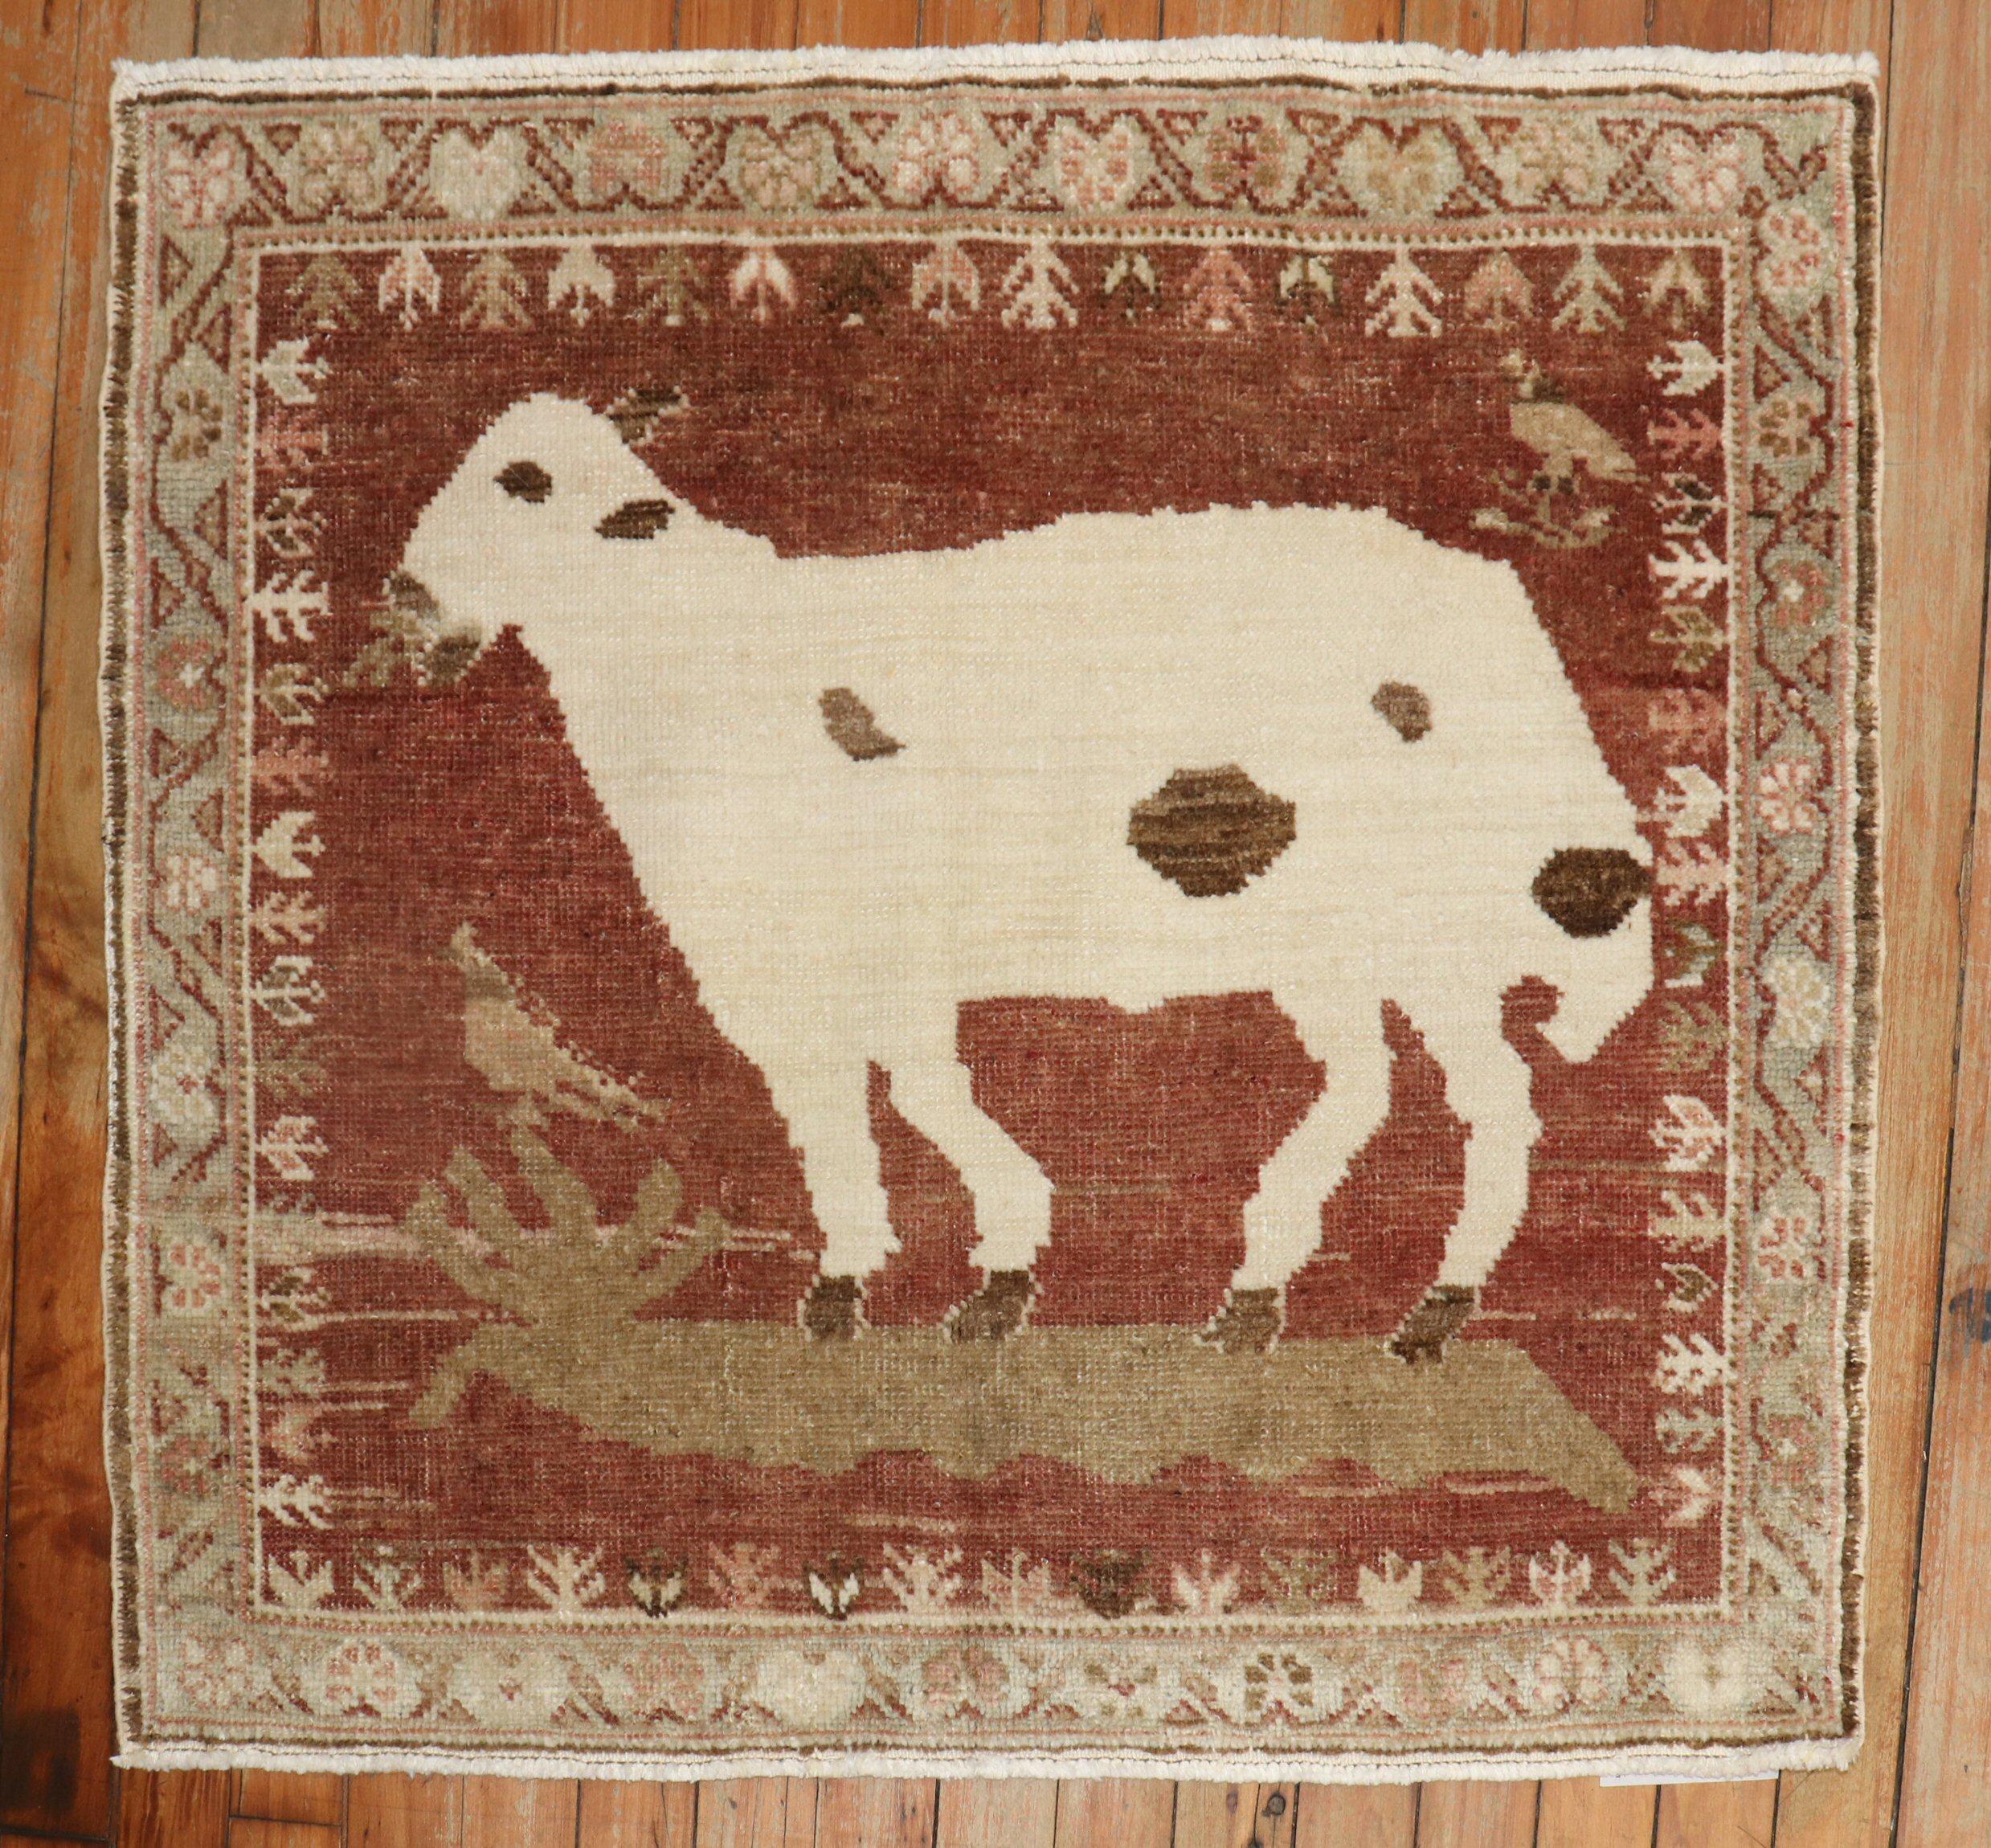 1930s Turkish Anatolian Pictorial rug depicting a white goat on a brown field

Measures: 2'6'' x 2'9''.